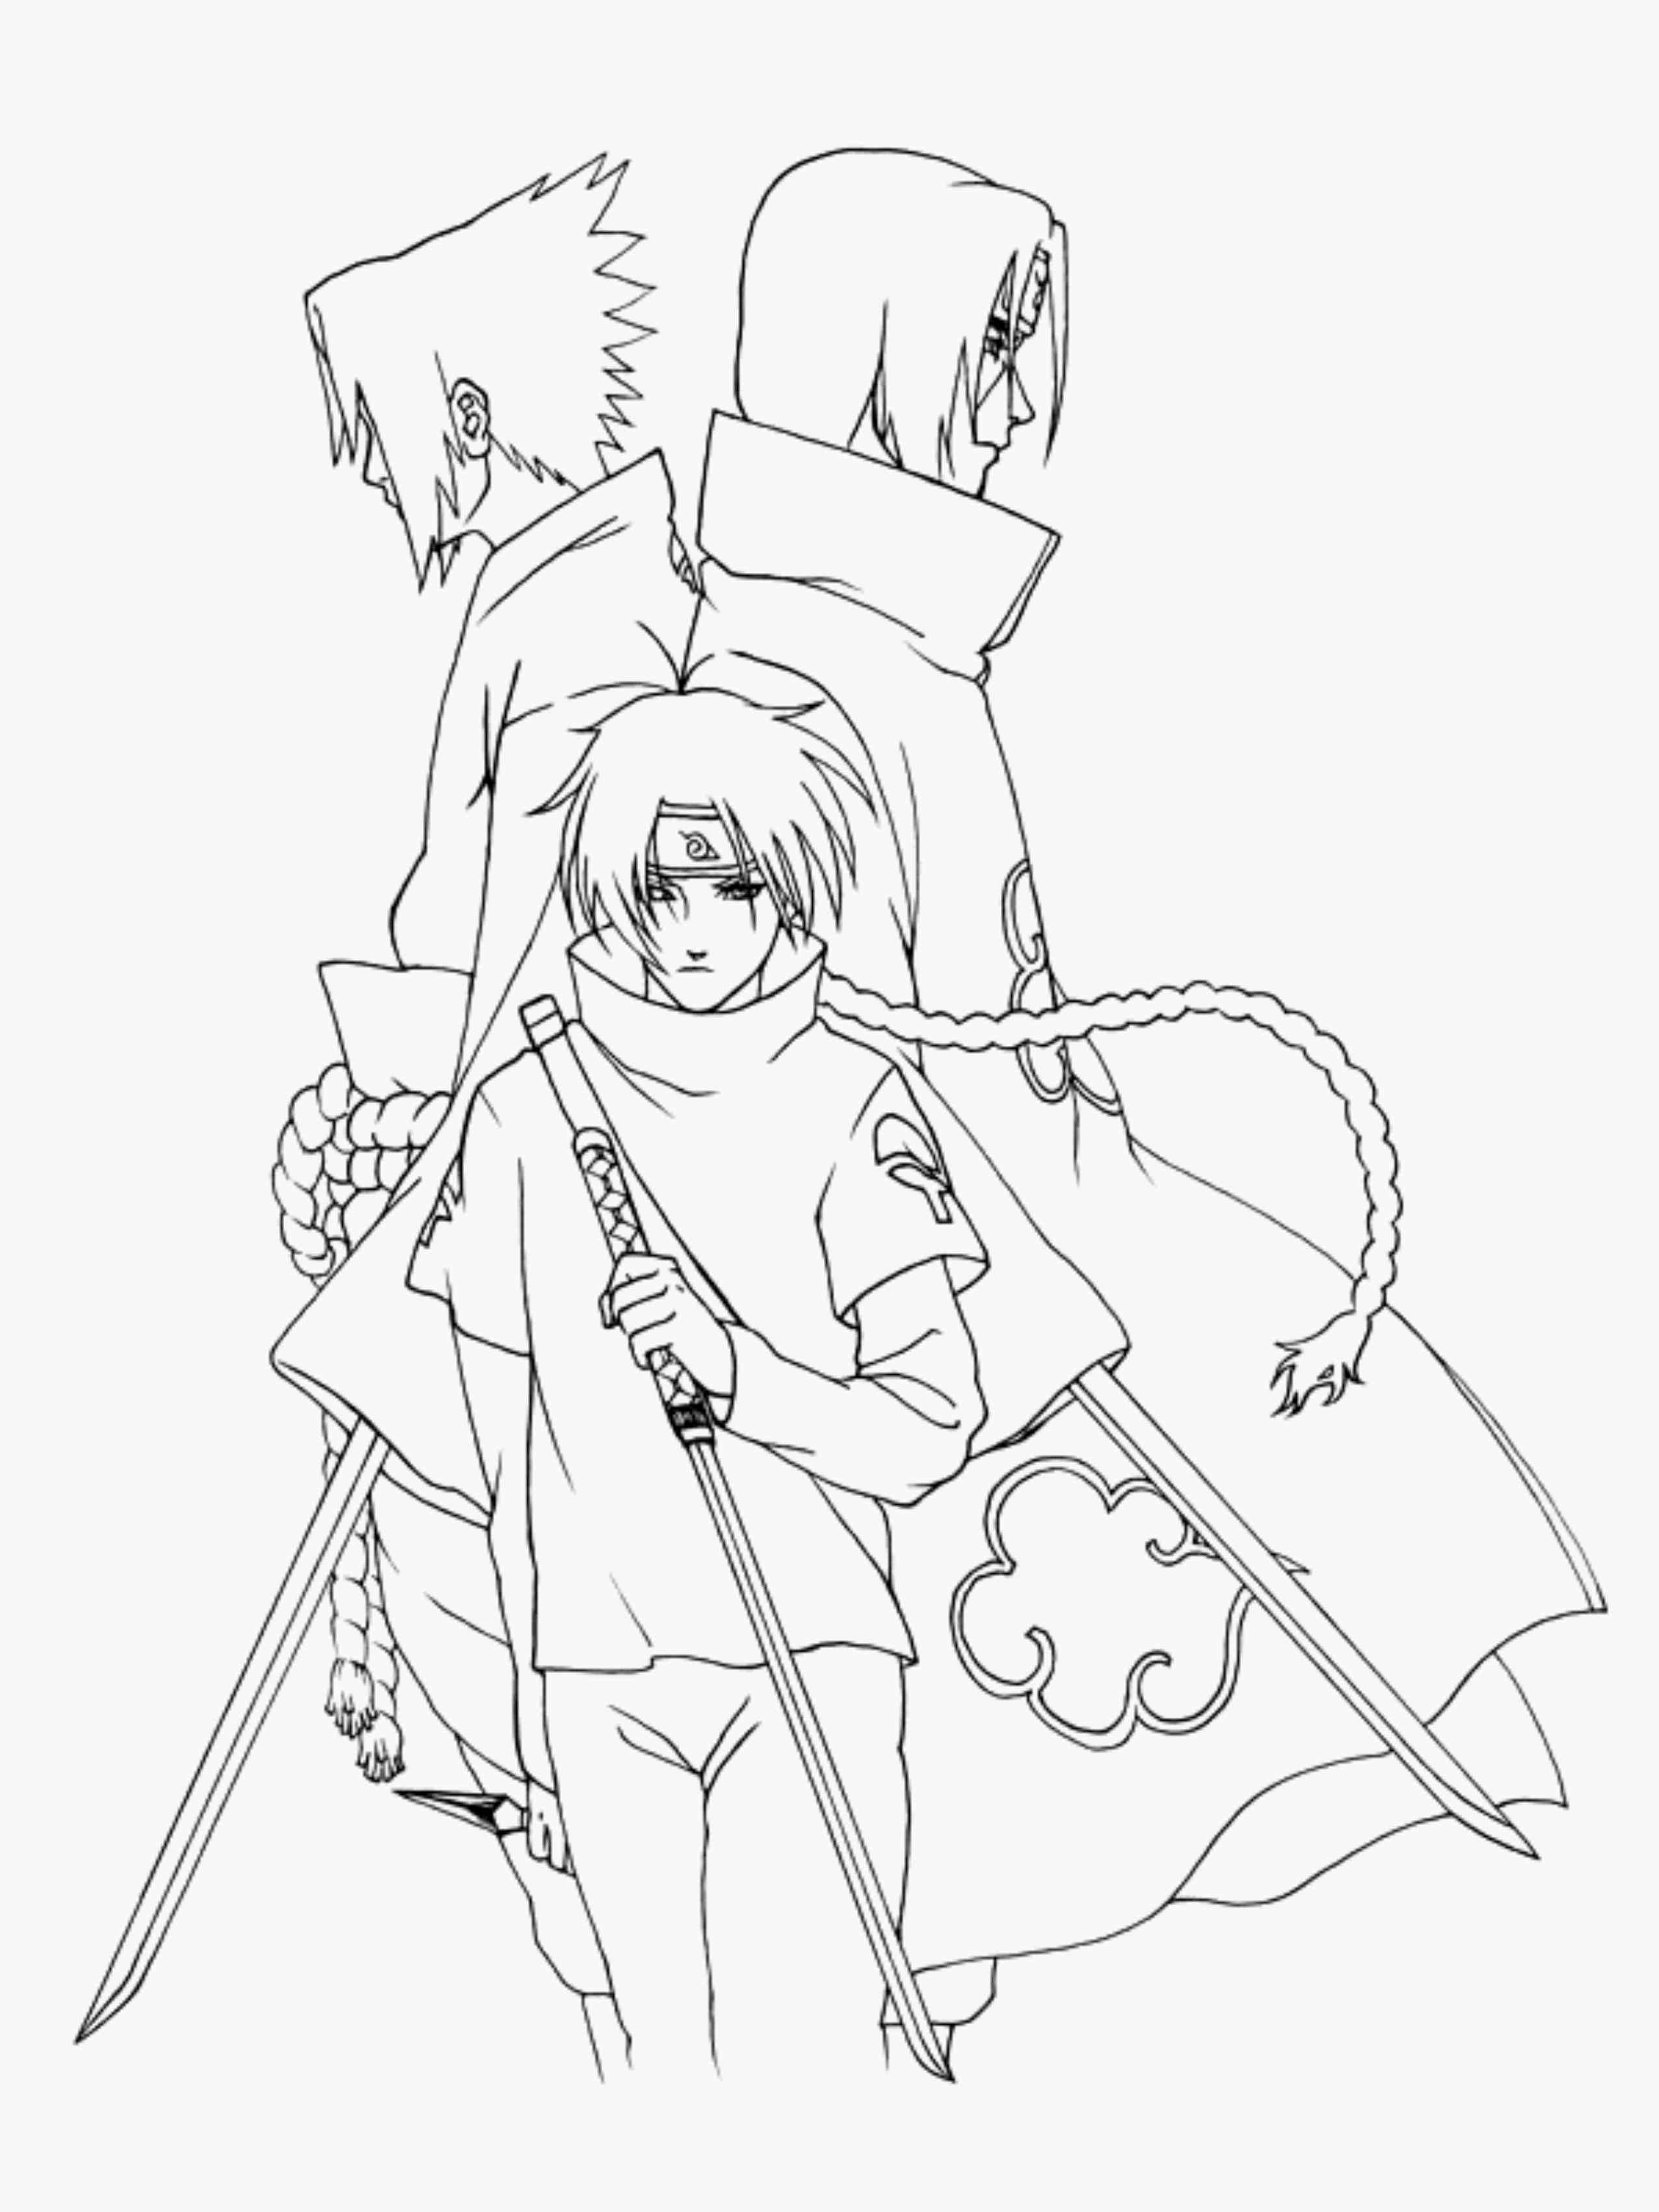 Coloring Page Of Naruto Shippuden Characters Kids - Coloring Home